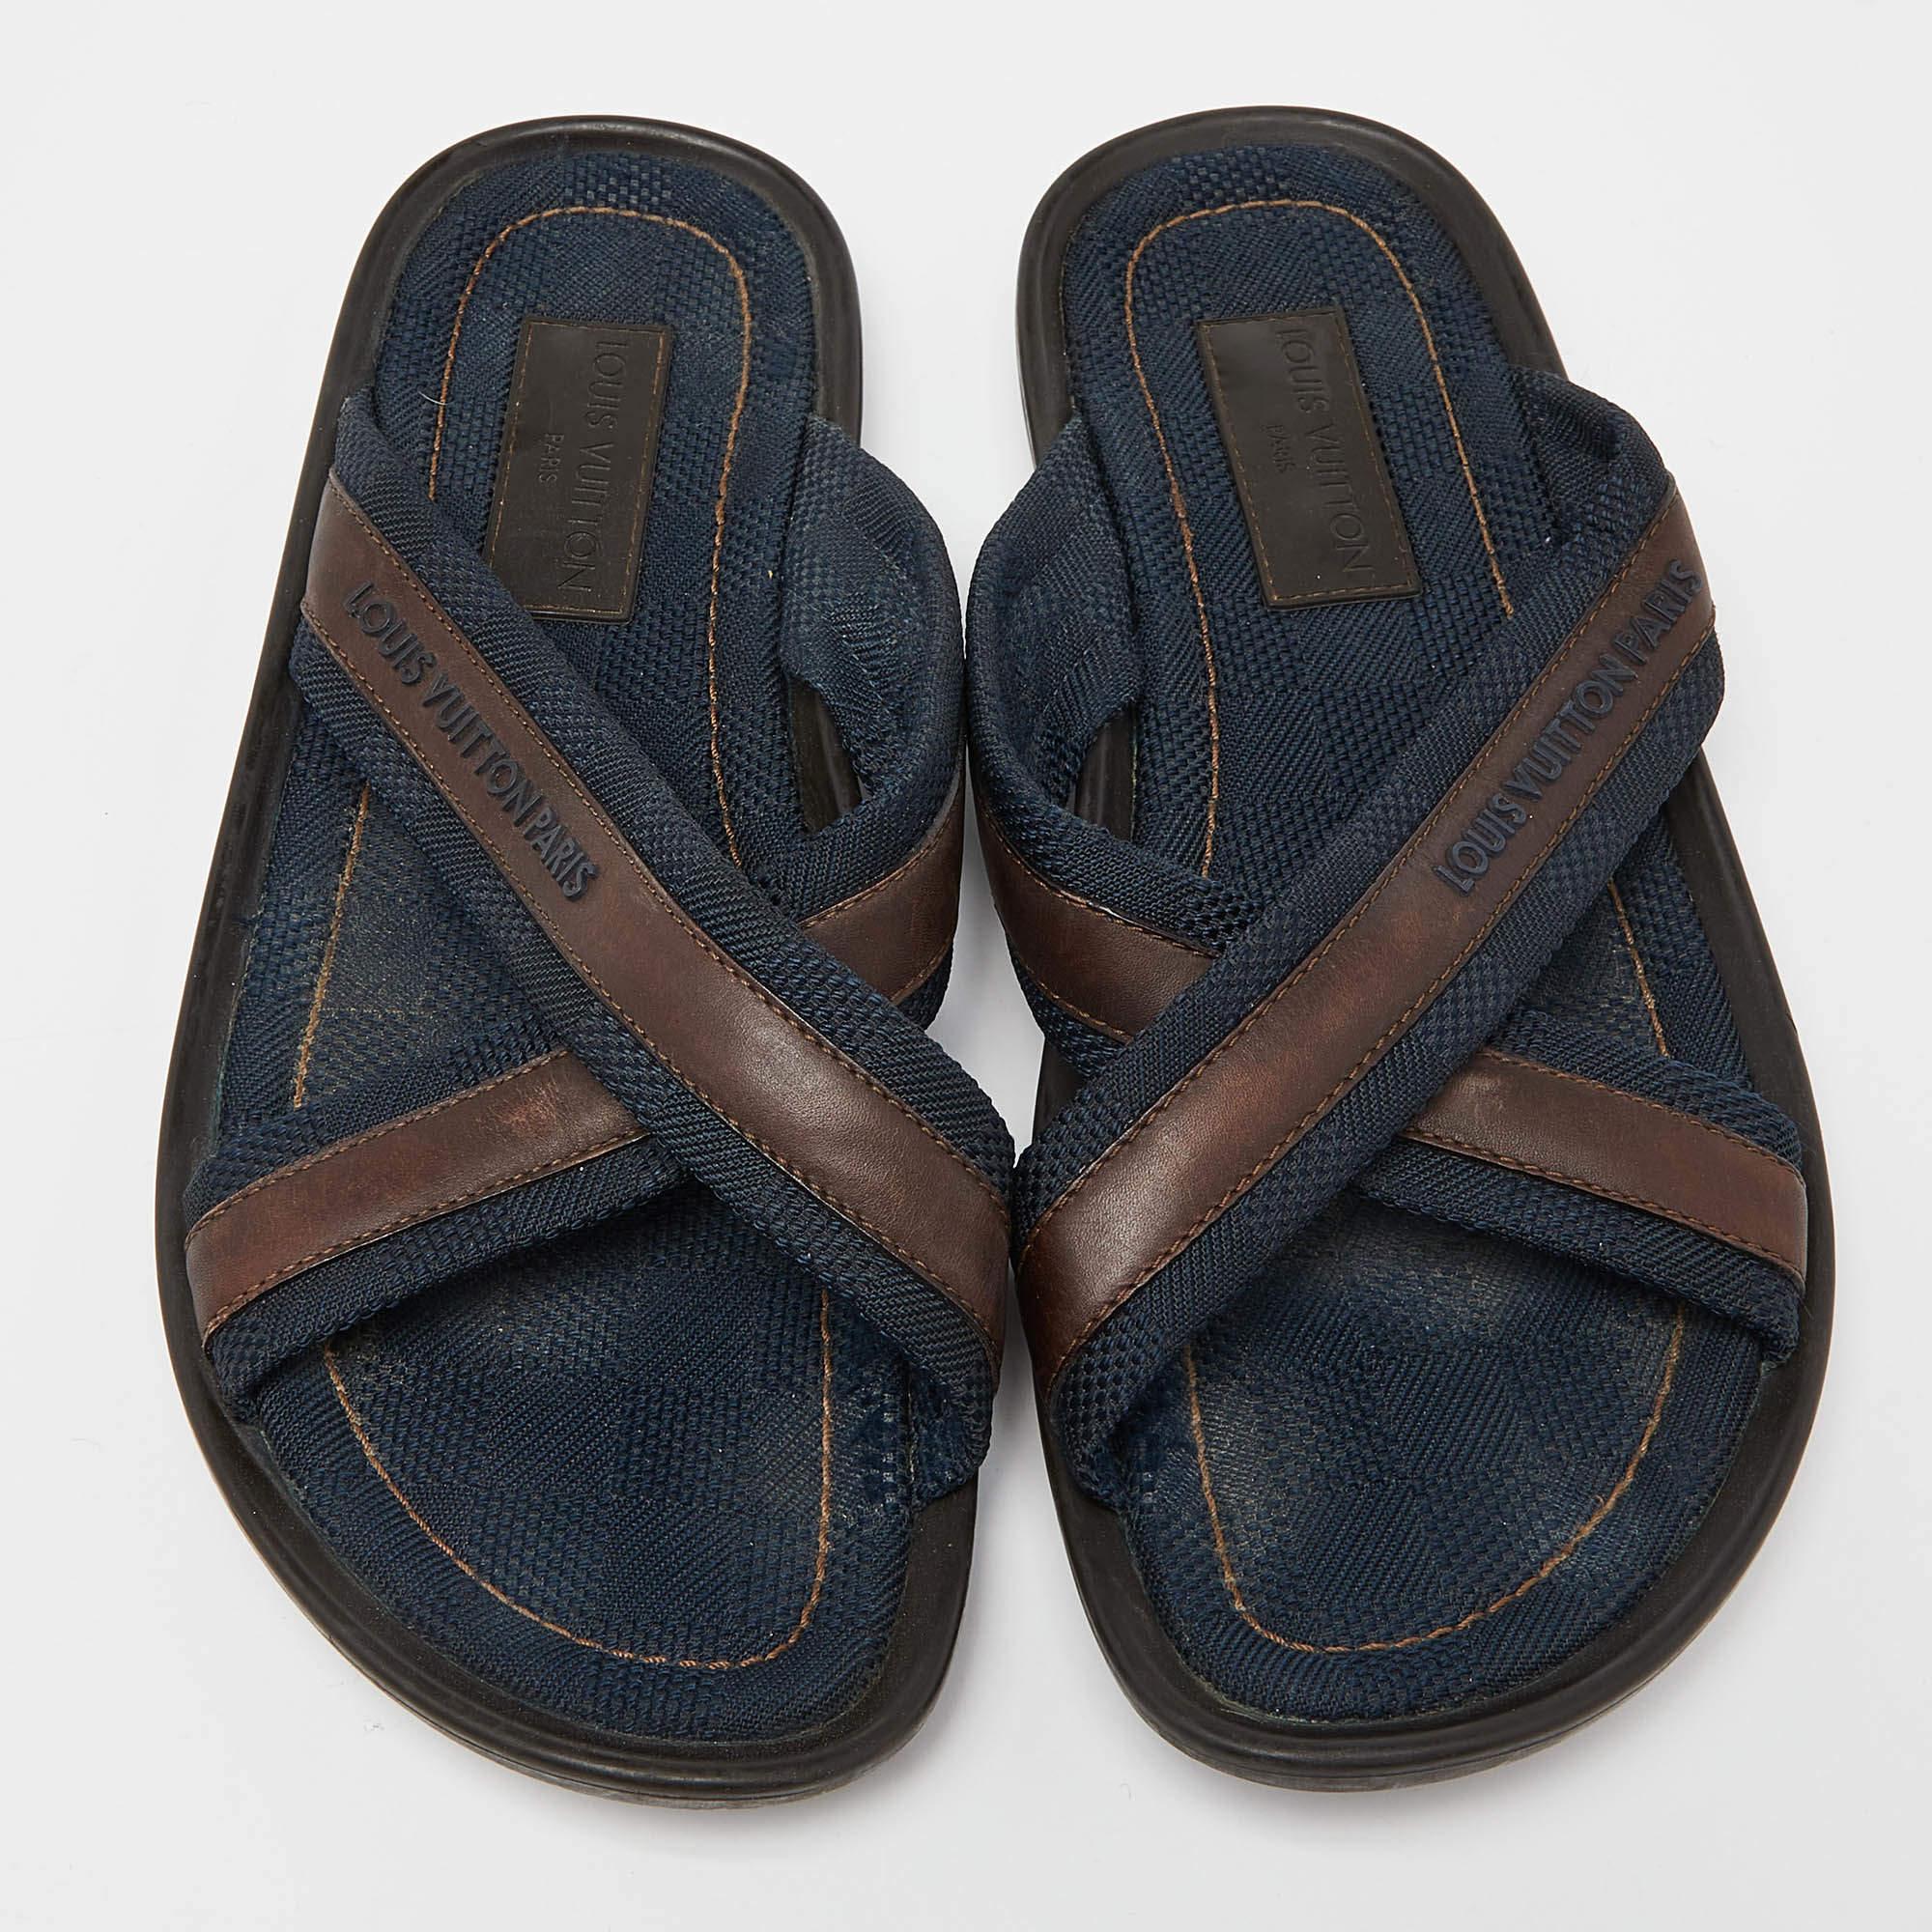 Let this comfortable pair be your first choice when you're out for a long day. These Louis Vuitton slides have well-sewn uppers beautifully set on durable soles.

